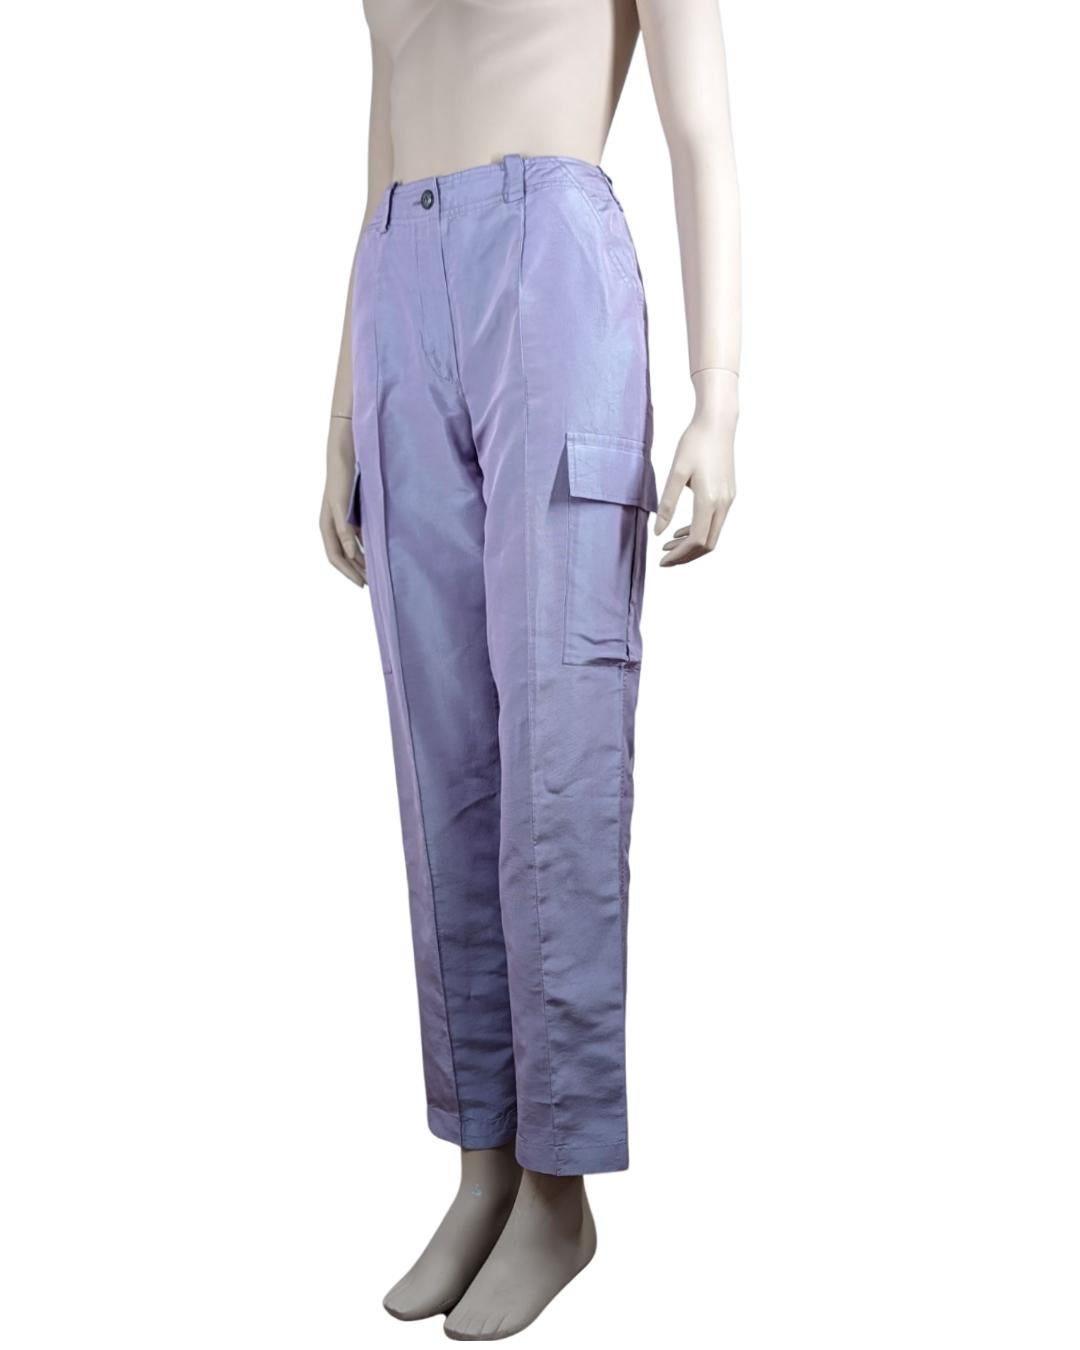 Chanel Fall1996 runway neon lila cargo pants.

. High waist
· Silver tone CC monogram logo
· Two pockets each sides
. Iridescent fabric

Size Fits XS to S 36FR

Flat measurements : 

Waist : 35 cm
Hips : 47 cm
Inseam : 80 cm
Front rise : 24